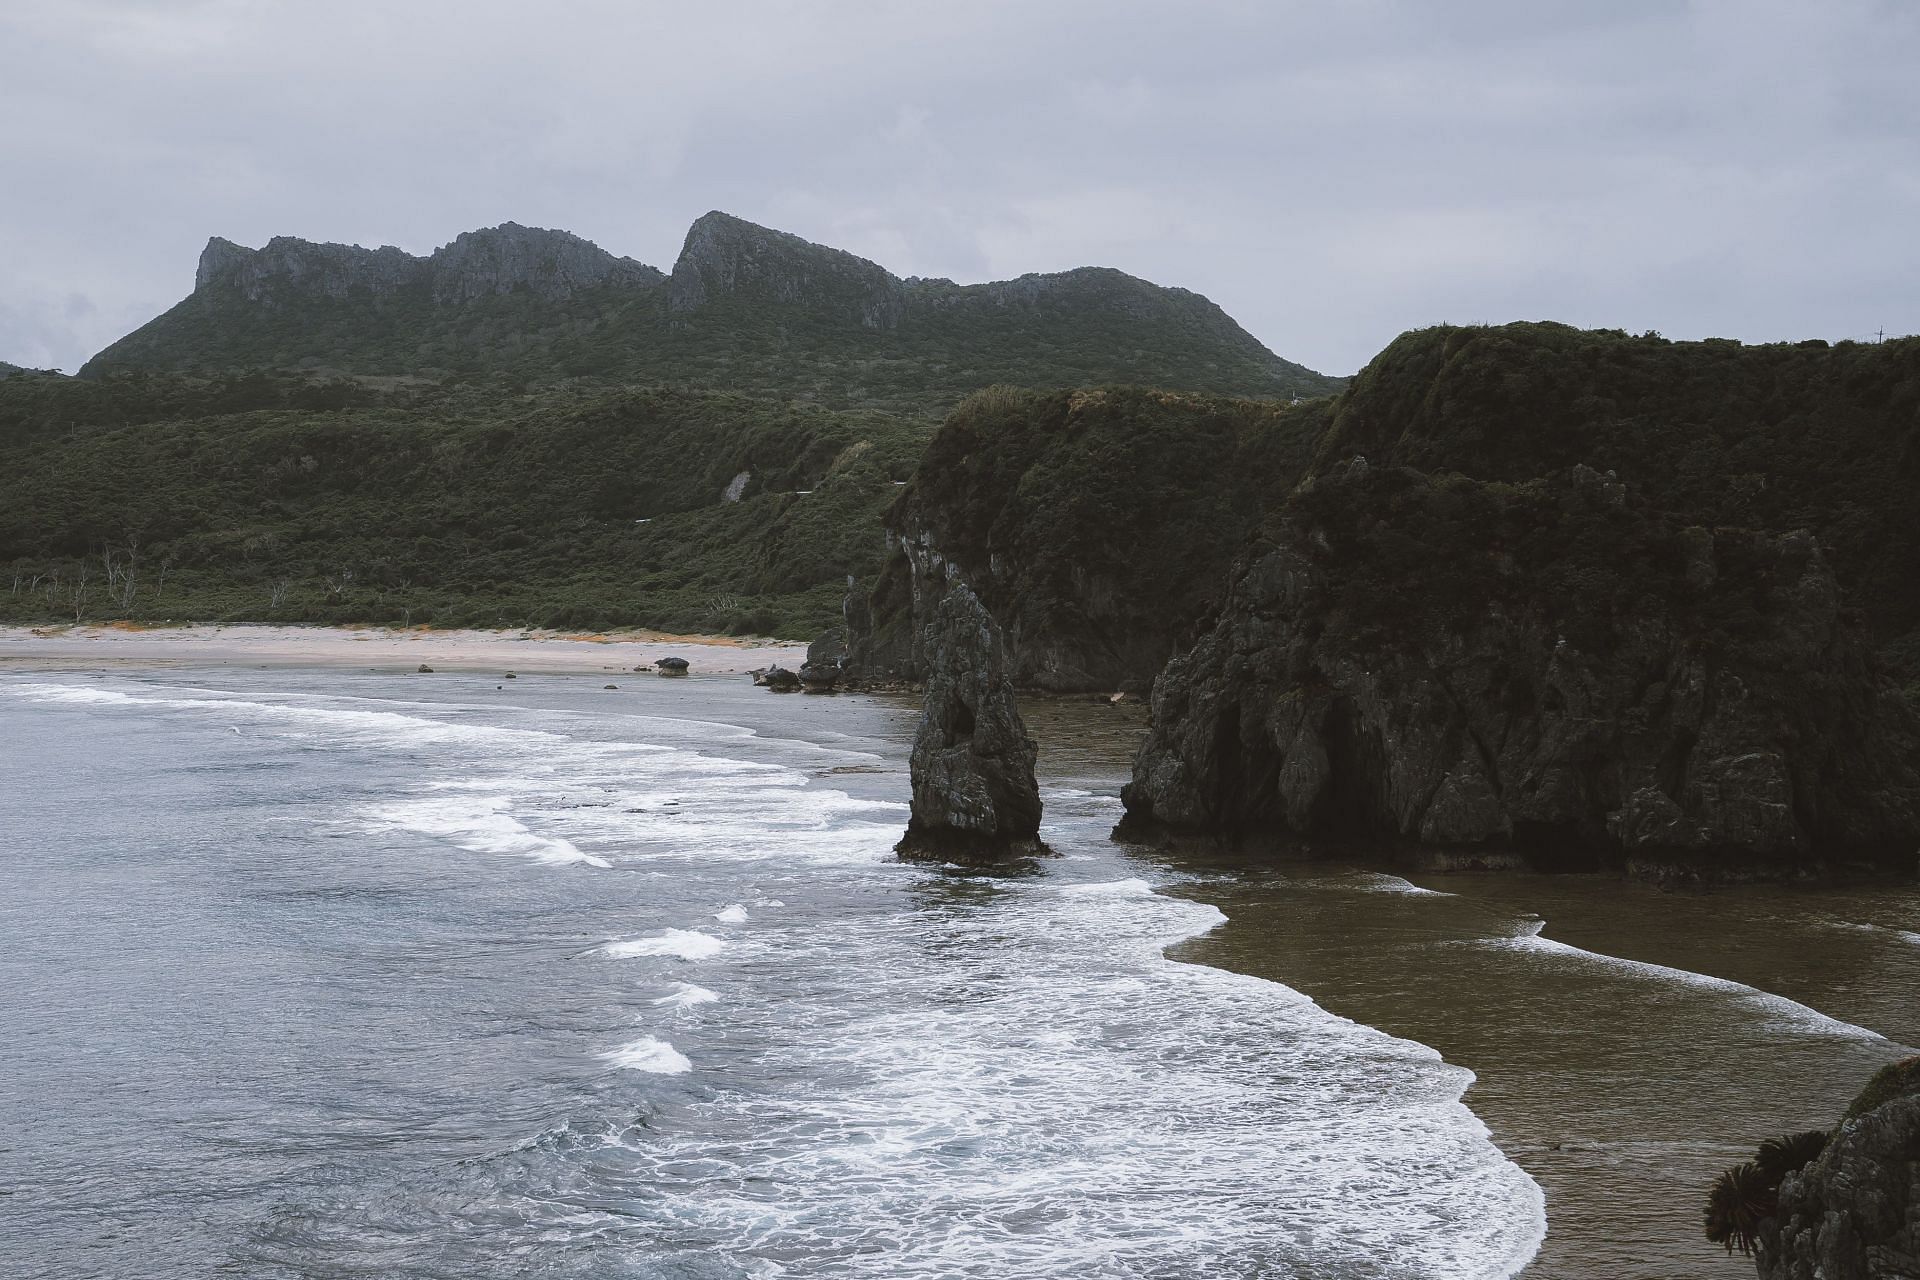 Okinawa is the leading blue zones in the world. (Image via Pexels/Skyler Sion)